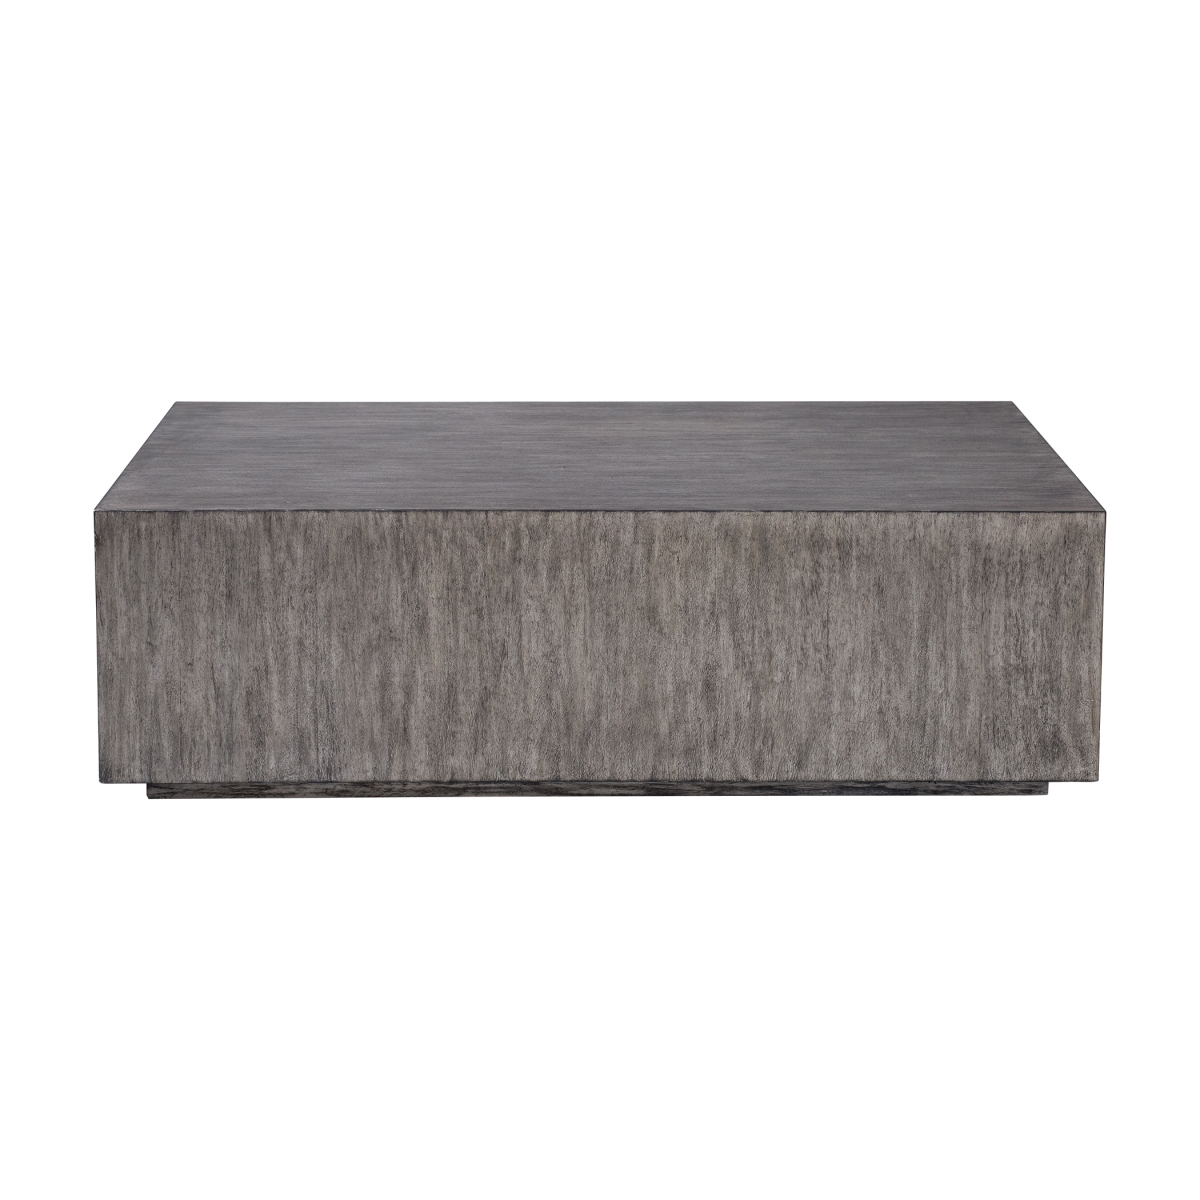 Picture of 212 Main 25443 Kareem Modern Gray Coffee Table